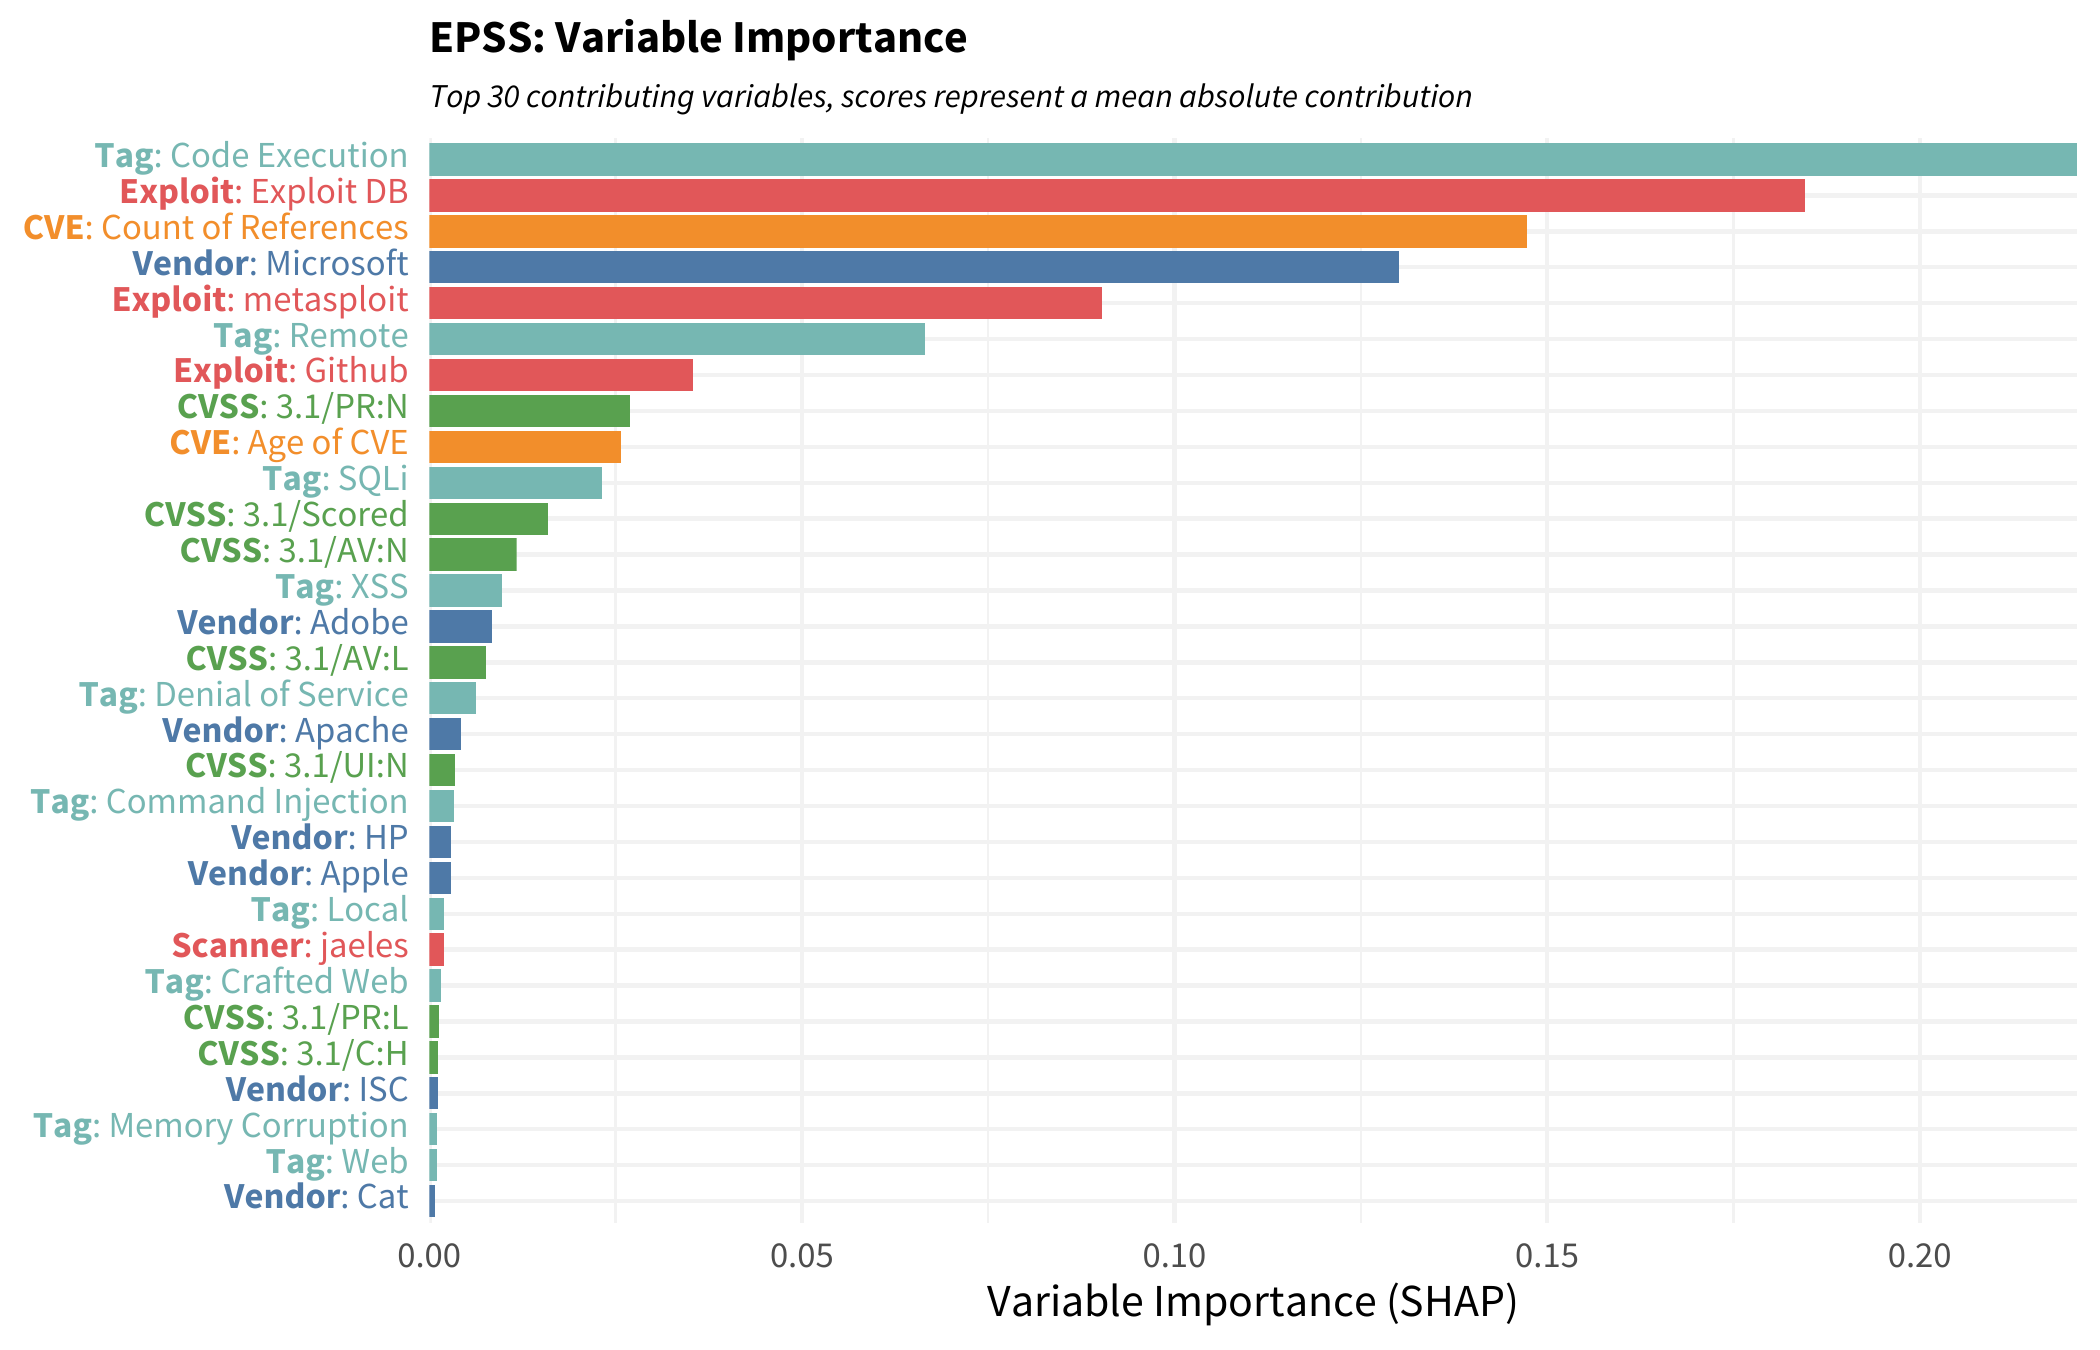 EPSS Variable Importance Graph